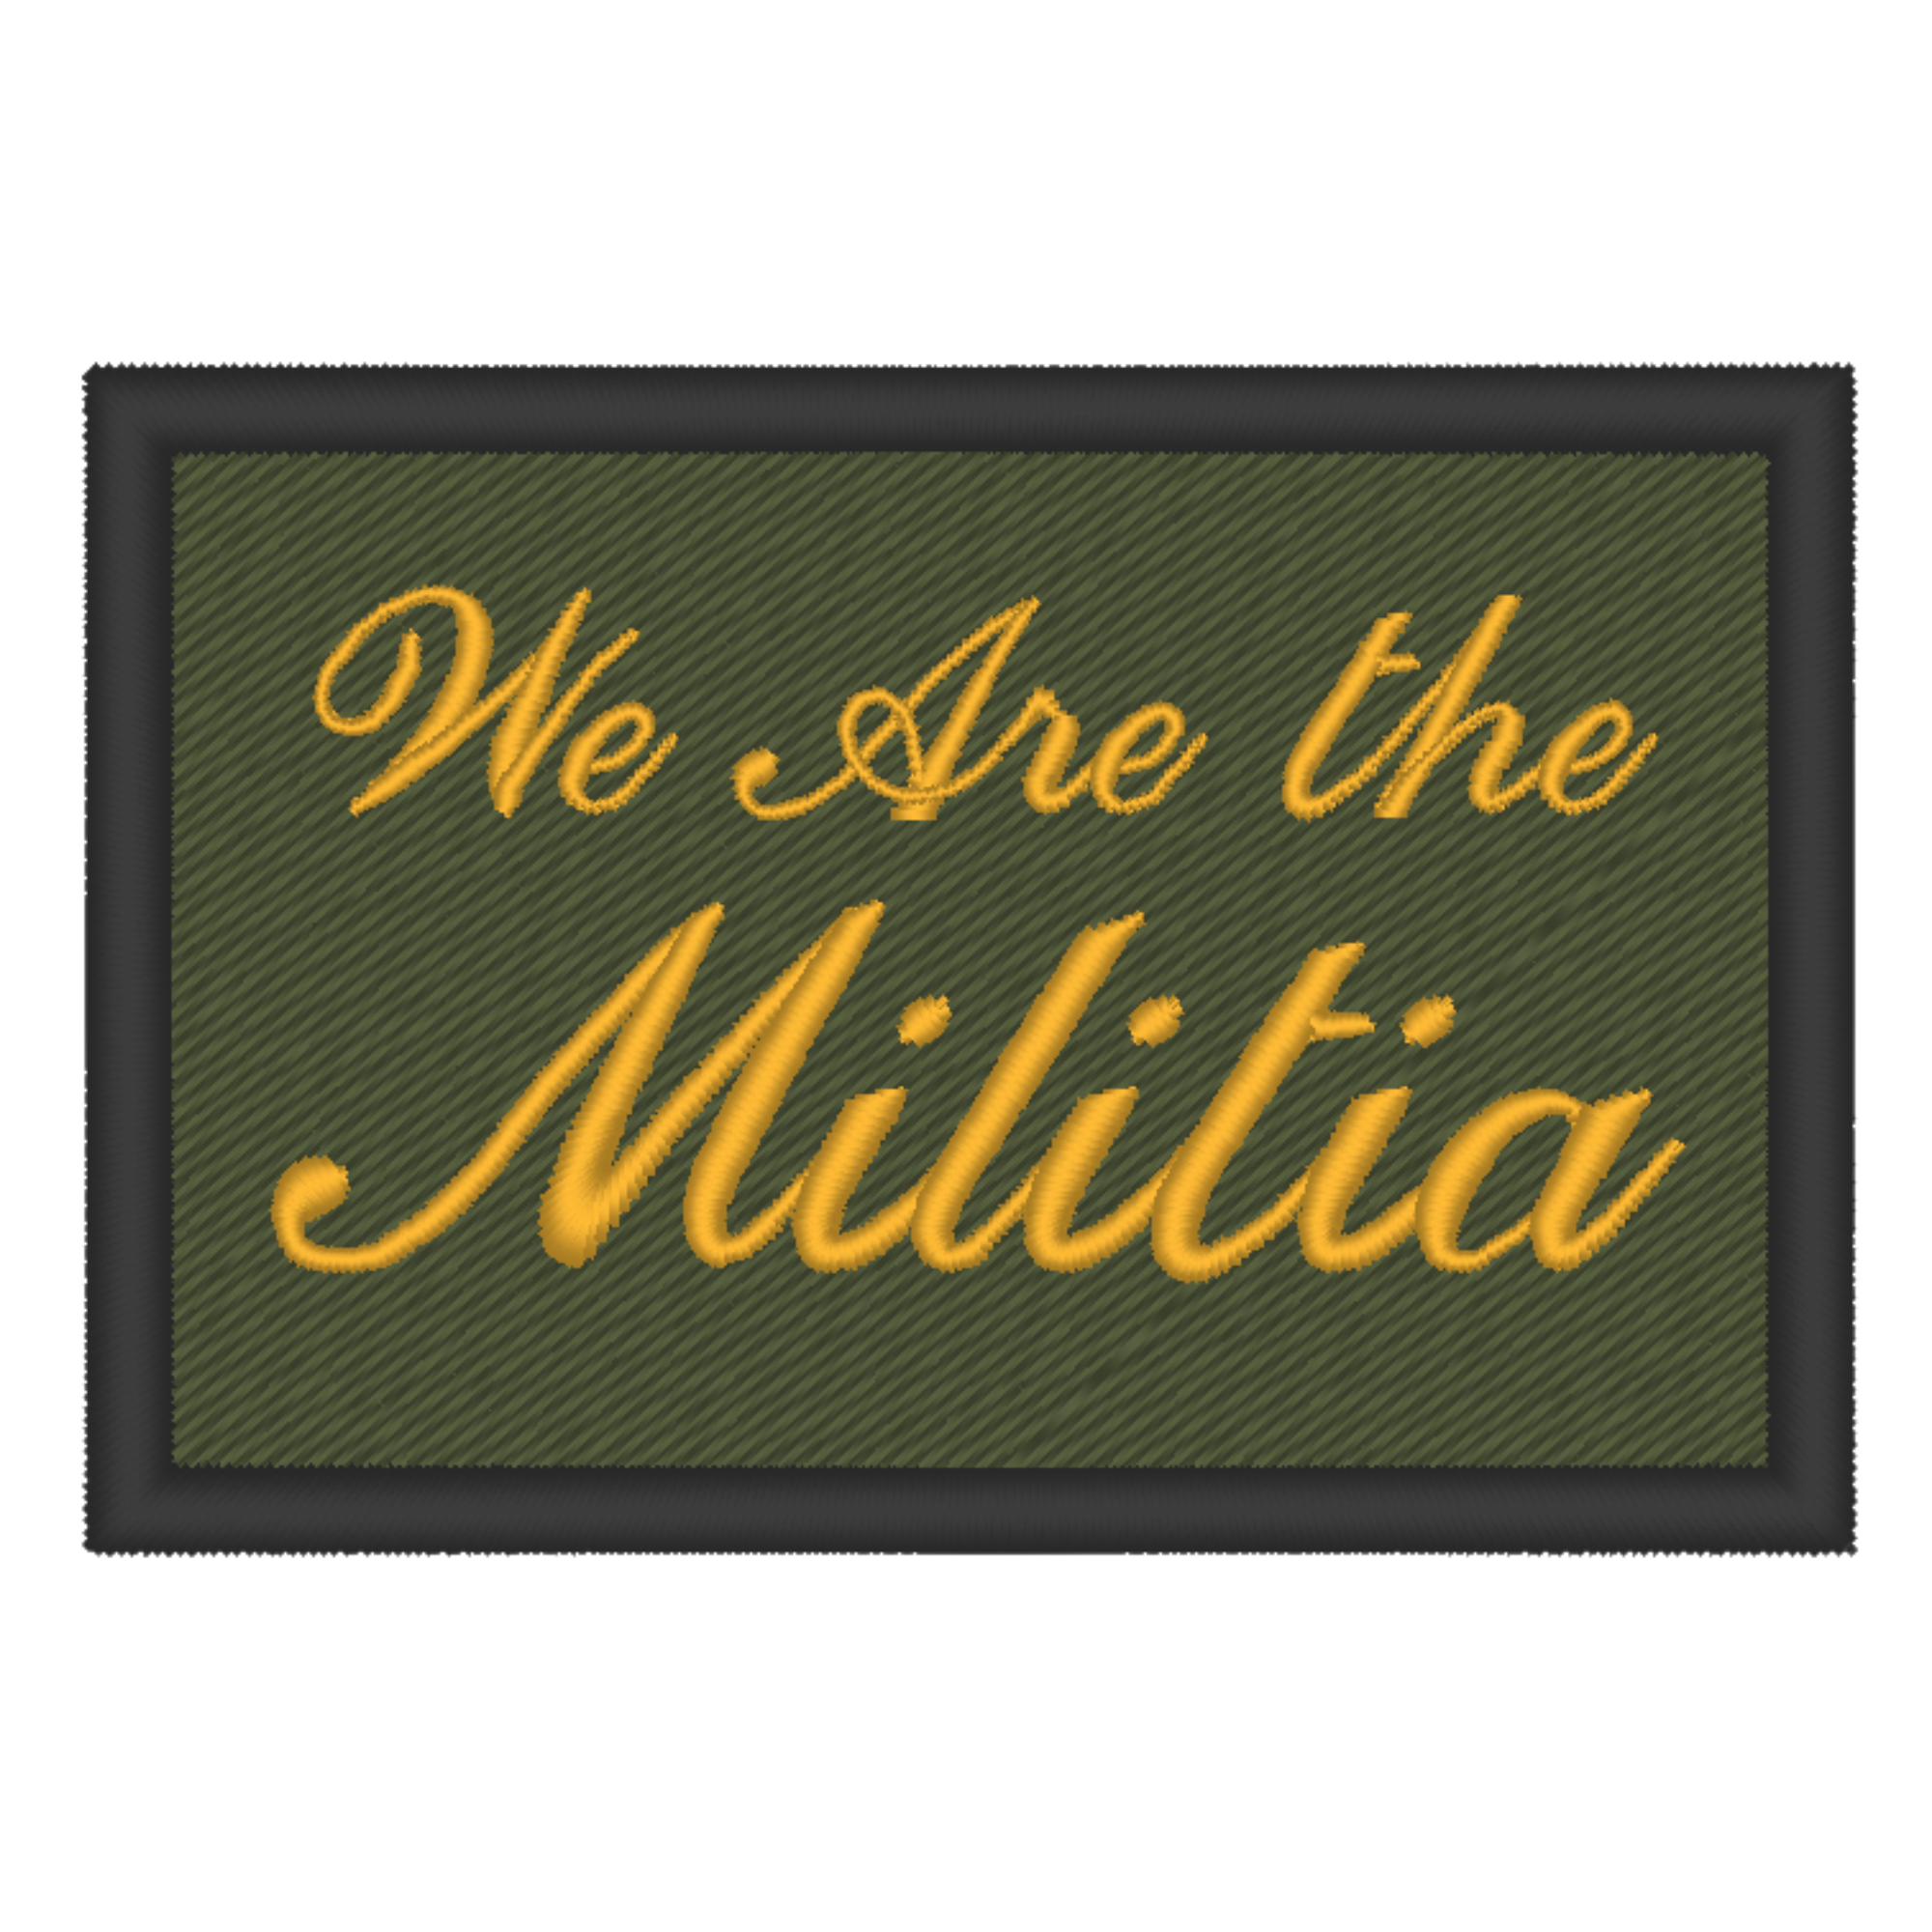 We Are the Militia Plate Carrier Patch – American Citizens Defense